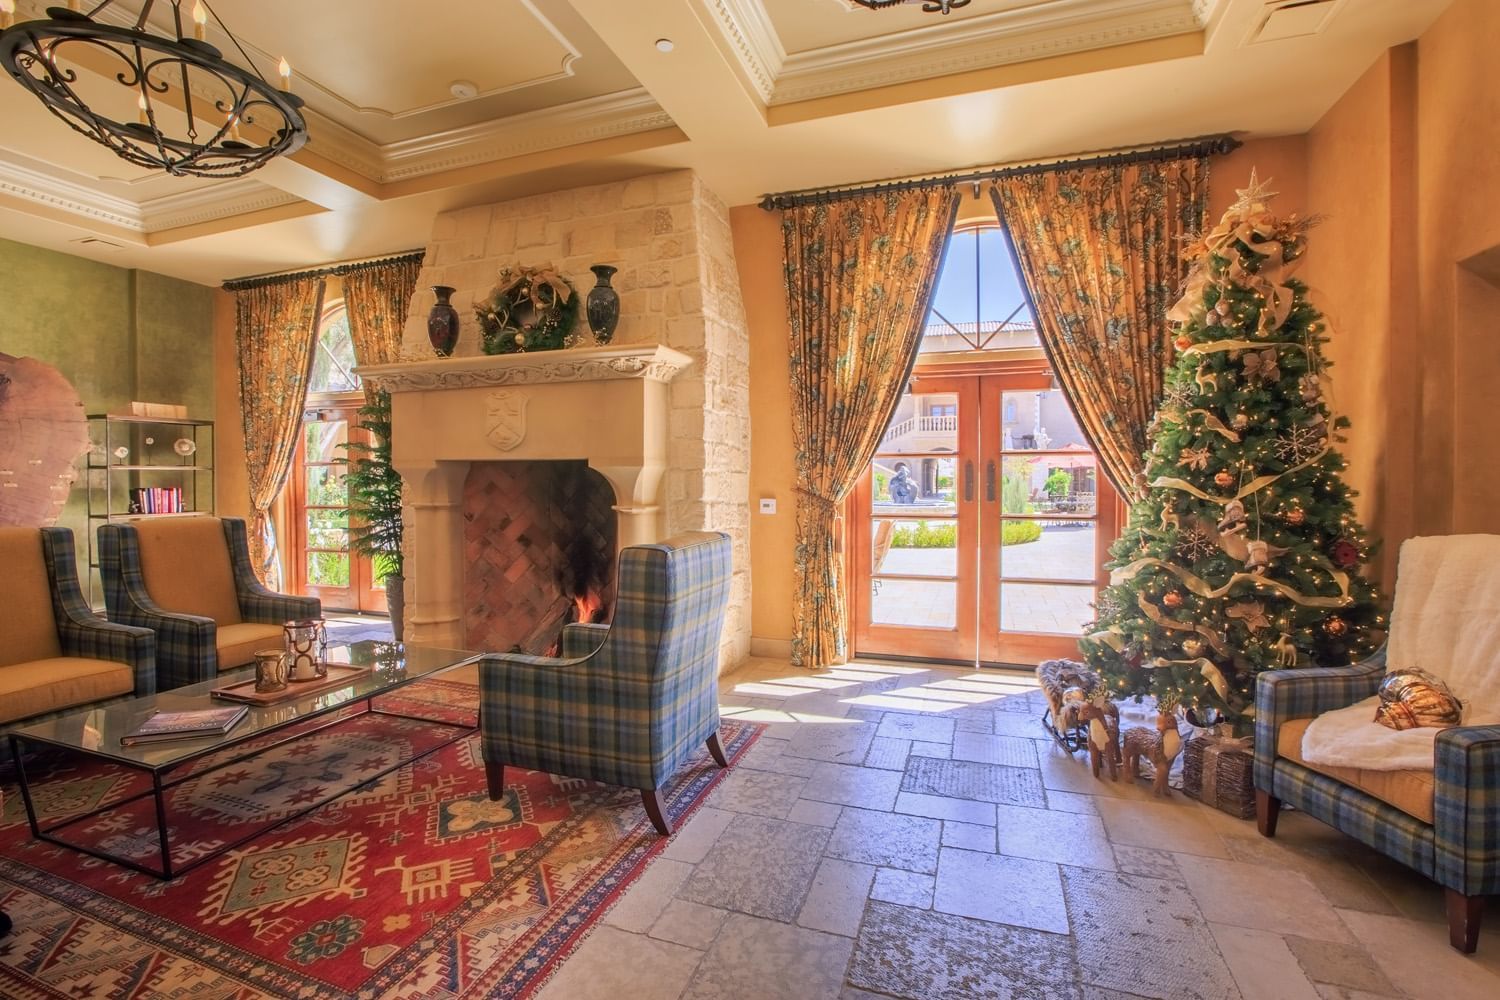 Sequoia Room with a Christmas Tree in the corner